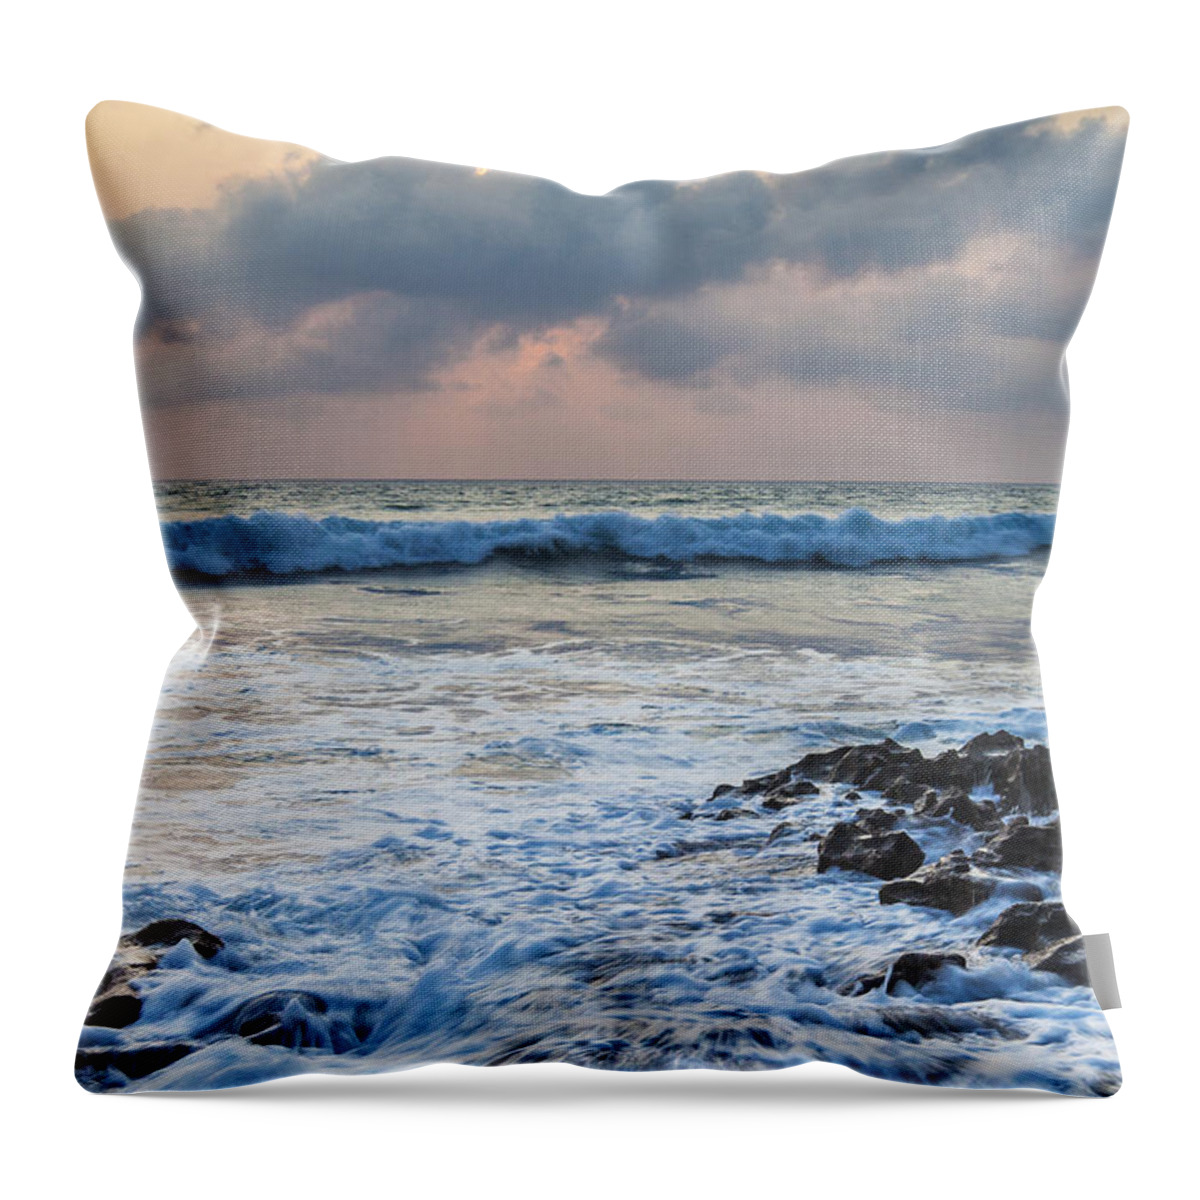 Art Throw Pillow featuring the photograph Over Rocks by Jon Glaser